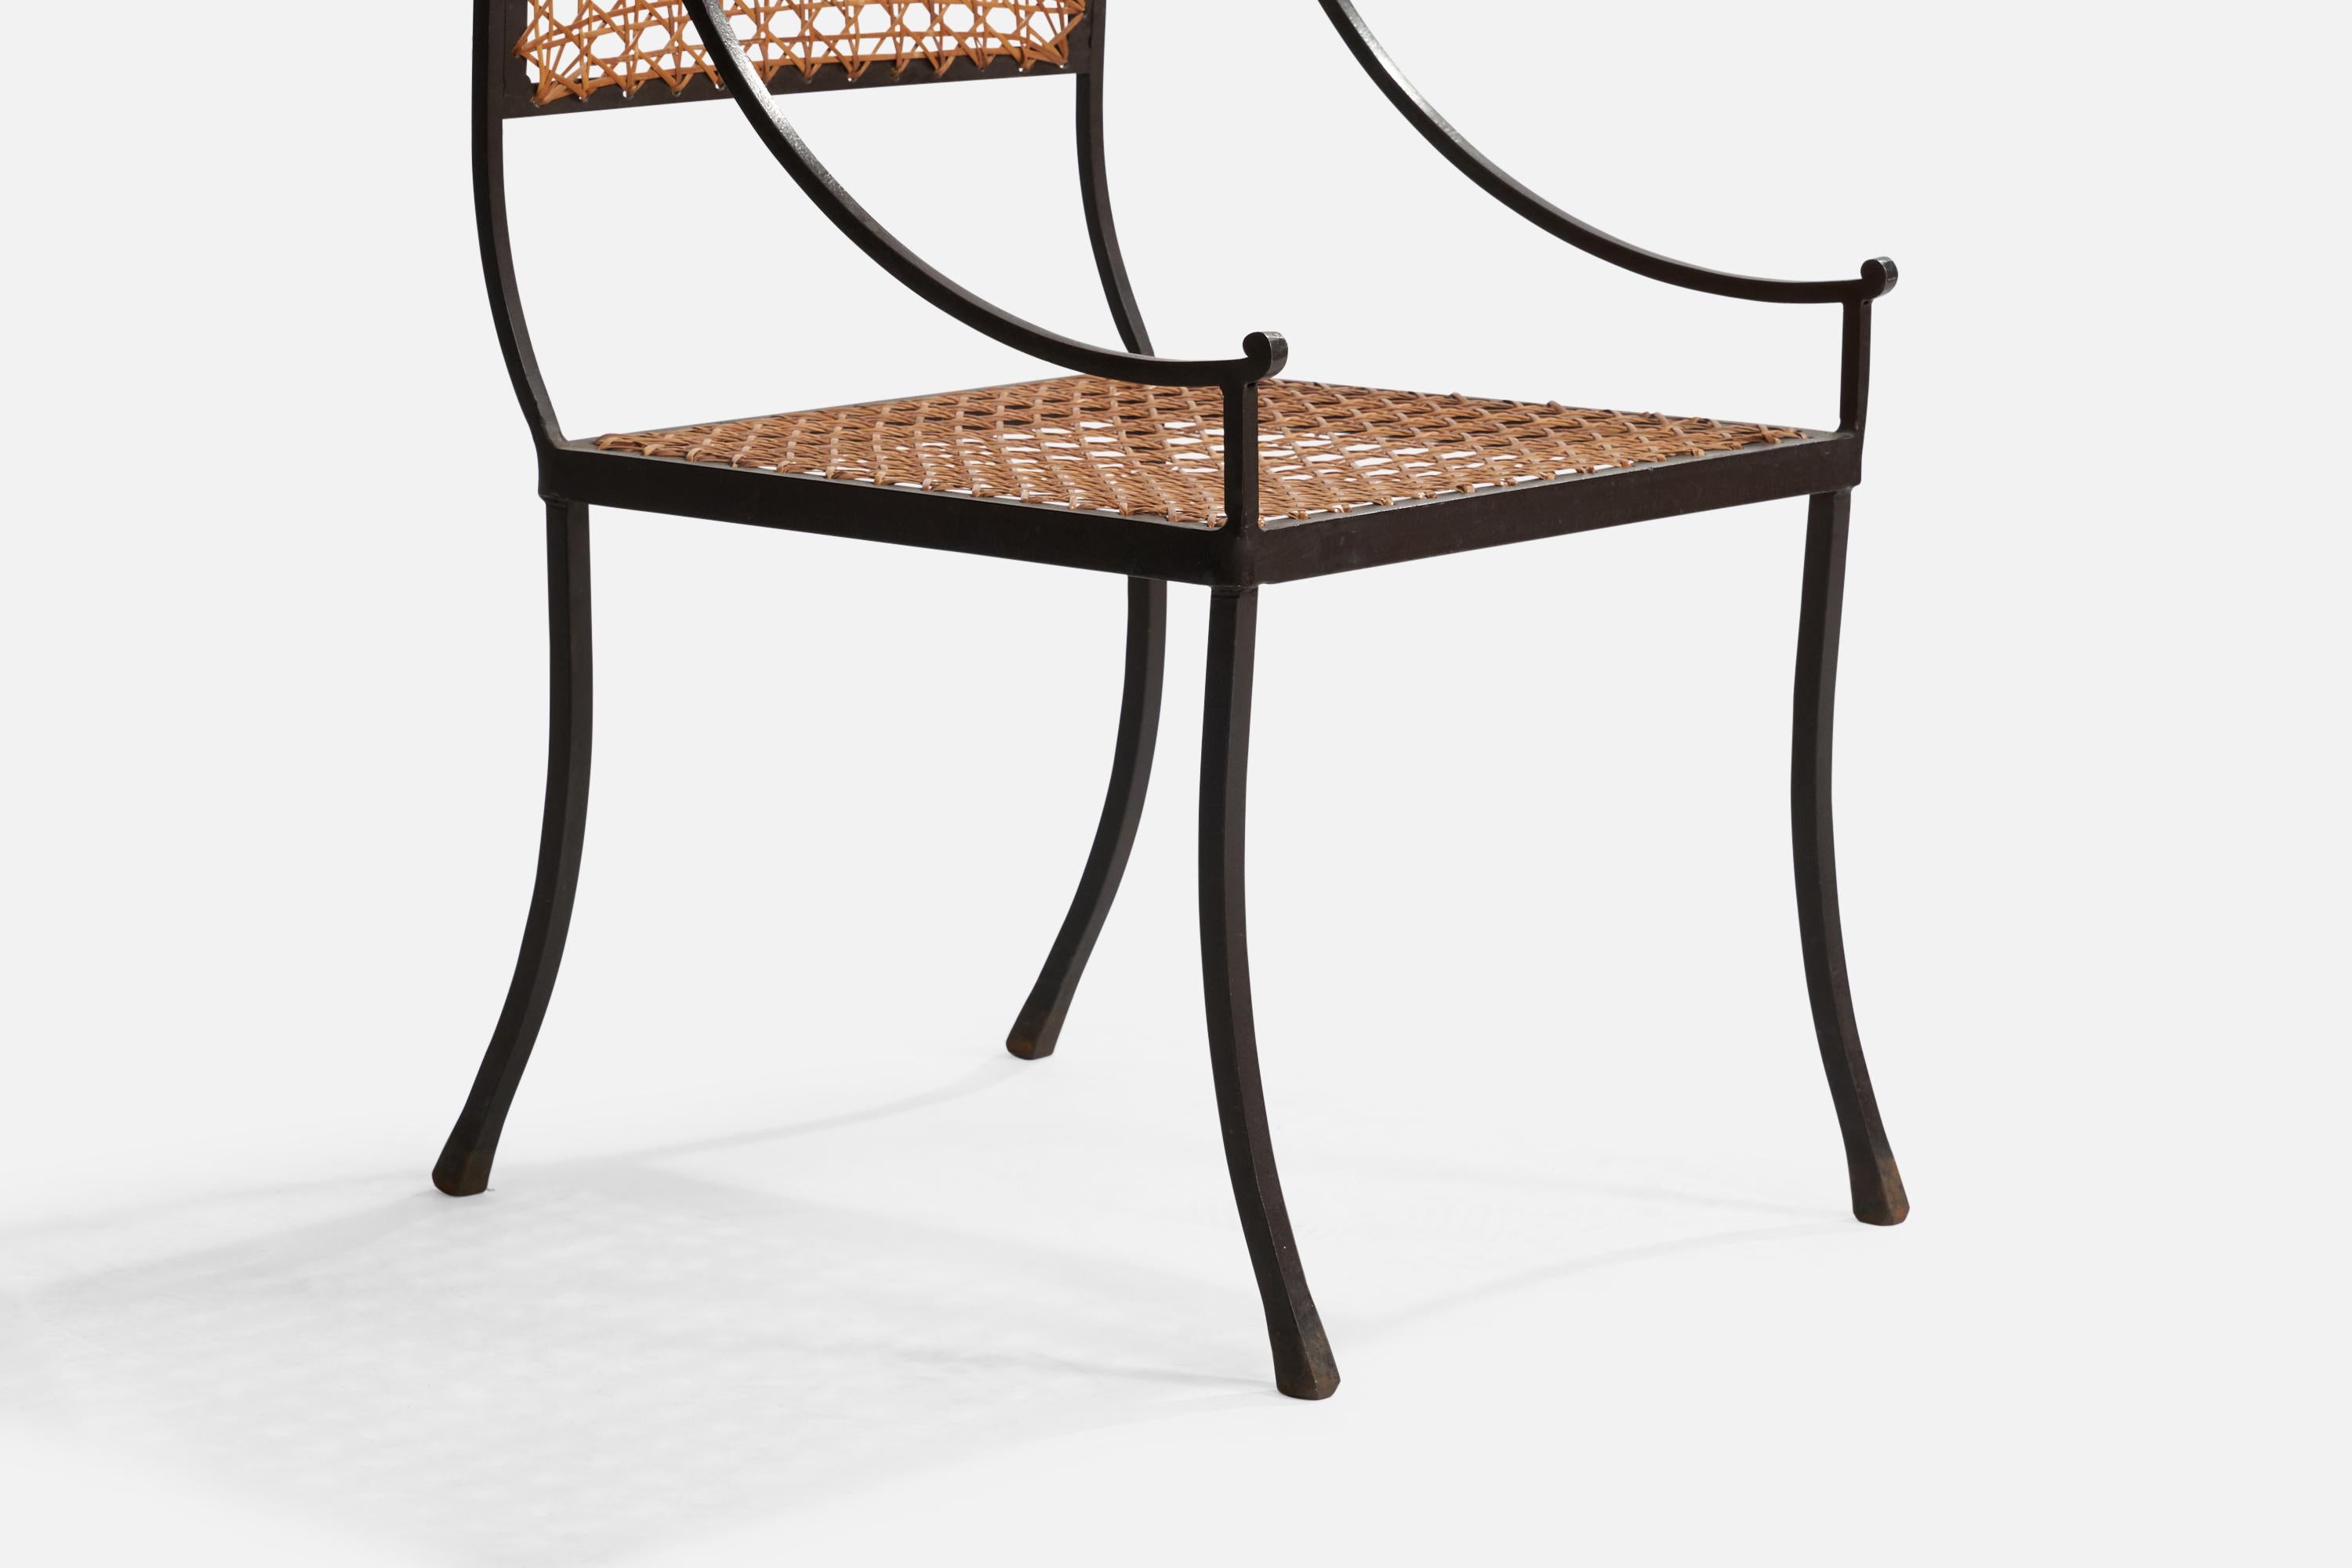 Mid-20th Century John Vesey, Arm Chairs, Wrought Iron, Cane, USA, 1950s For Sale